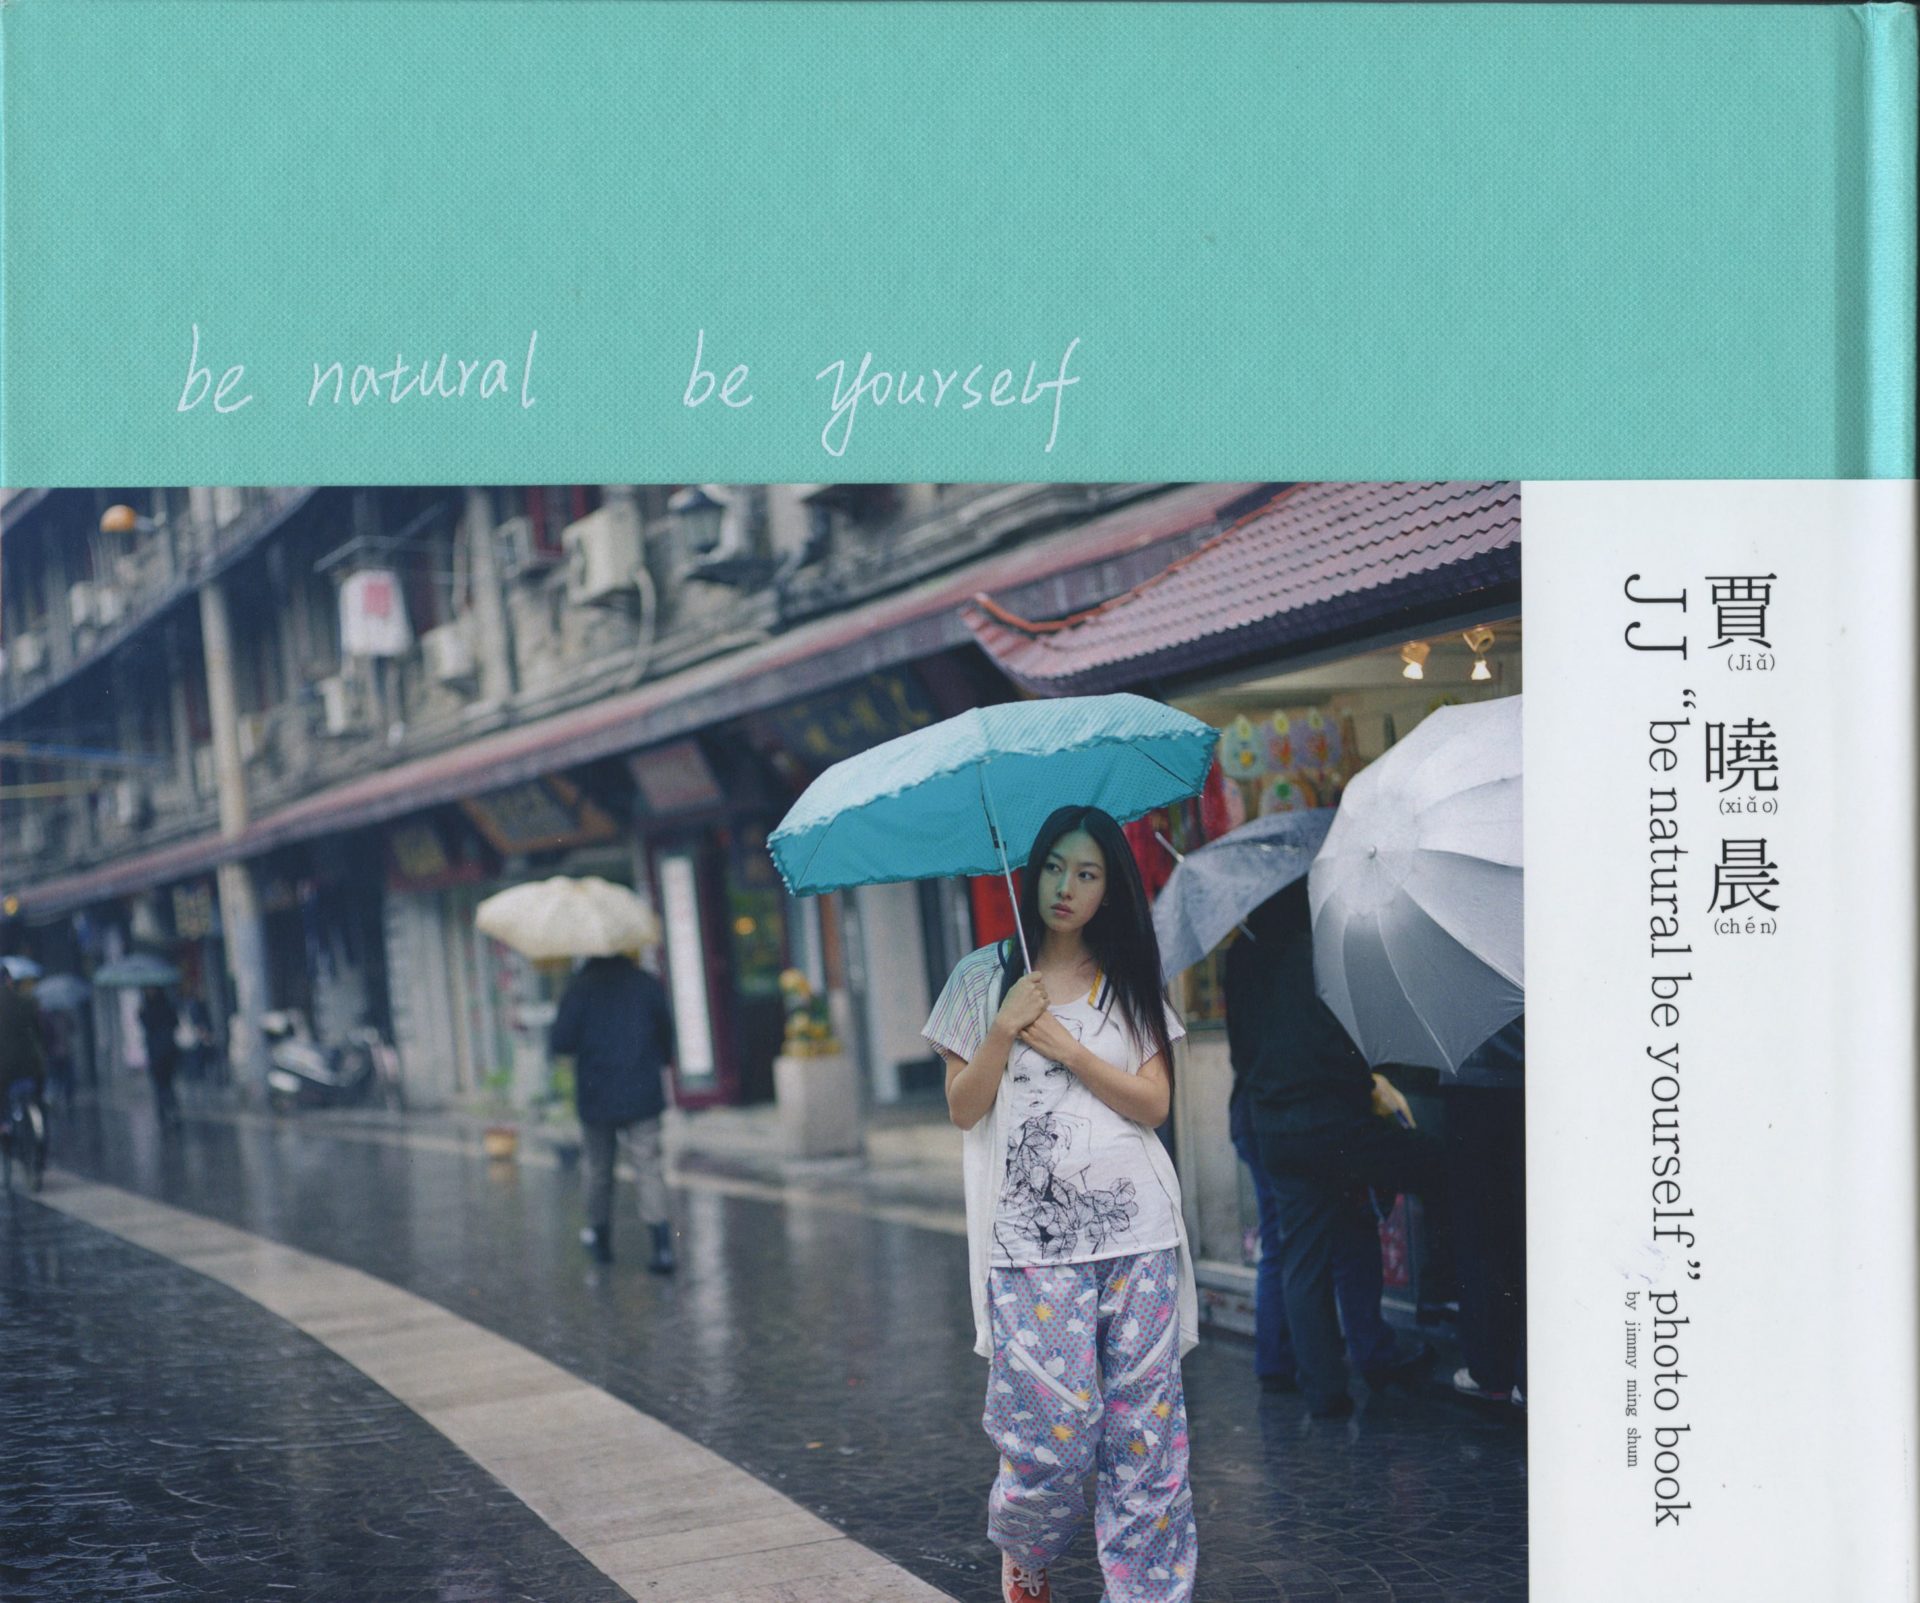 JJ “be natural be yourself” photo book